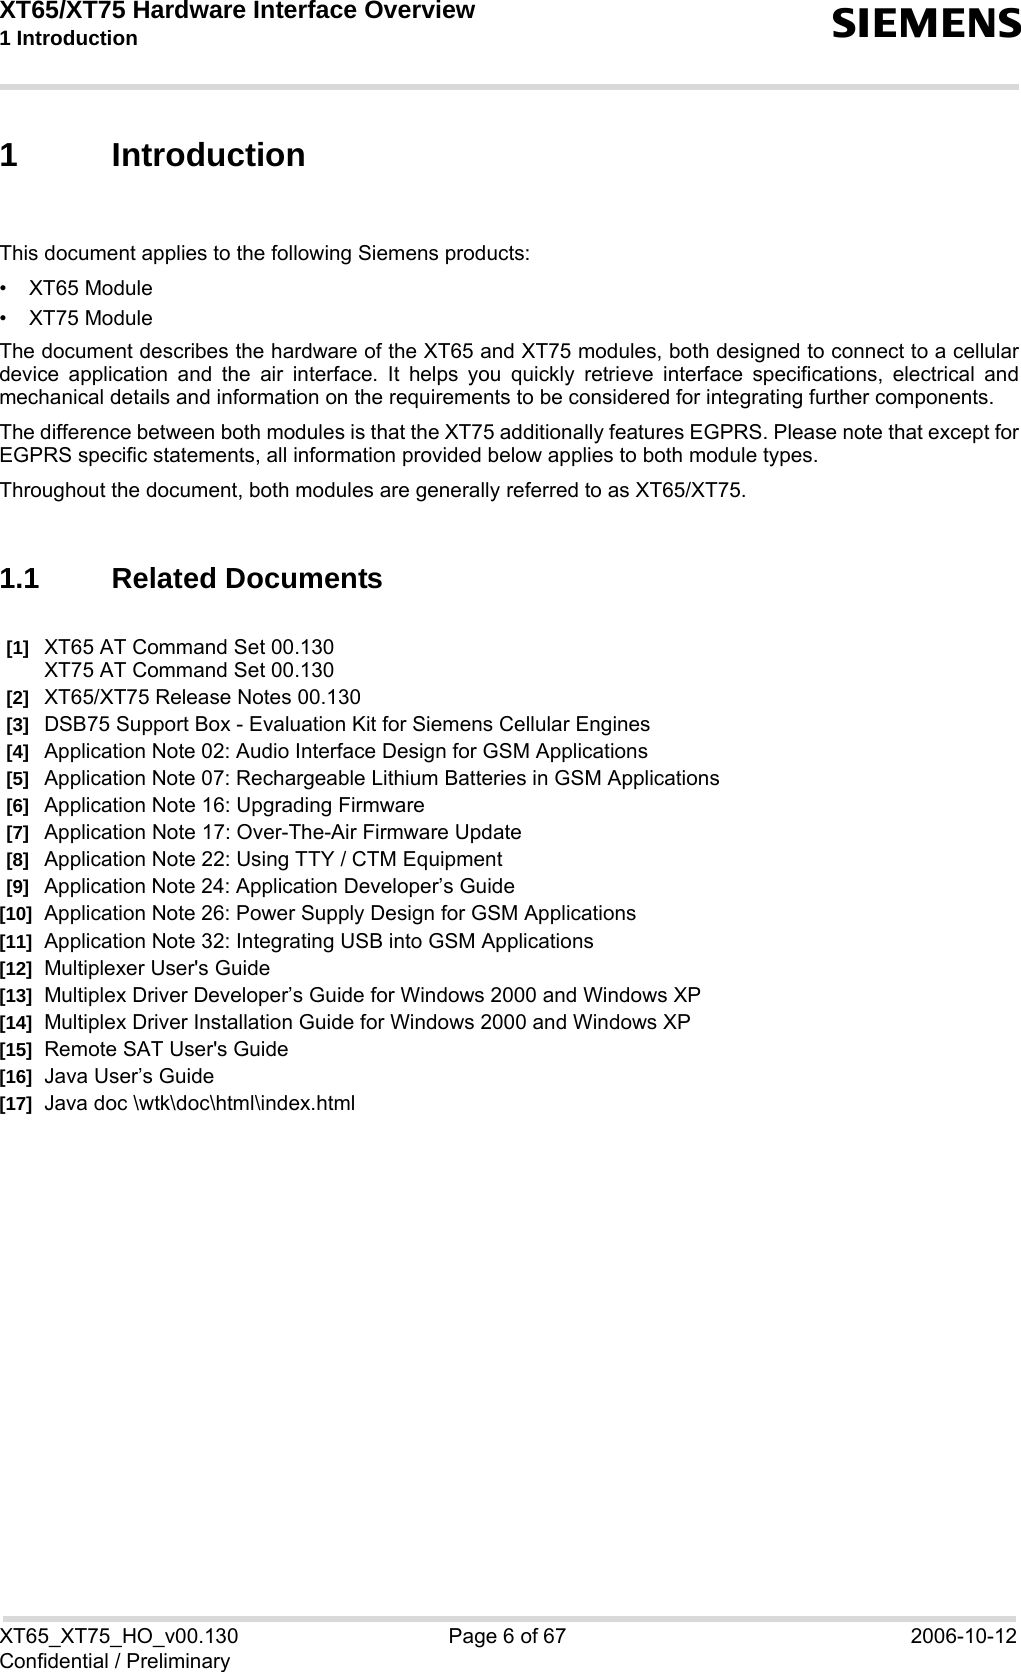 XT65/XT75 Hardware Interface Overview 1 Introduction  sXT65_XT75_HO_v00.130 Page 6 of 67 2006-10-12Confidential / Preliminary1 IntroductionThis document applies to the following Siemens products:• XT65 Module• XT75 ModuleThe document describes the hardware of the XT65 and XT75 modules, both designed to connect to a cellulardevice application and the air interface. It helps you quickly retrieve interface specifications, electrical andmechanical details and information on the requirements to be considered for integrating further components.The difference between both modules is that the XT75 additionally features EGPRS. Please note that except forEGPRS specific statements, all information provided below applies to both module types. Throughout the document, both modules are generally referred to as XT65/XT75.1.1 Related Documents[1] XT65 AT Command Set 00.130XT75 AT Command Set 00.130[2] XT65/XT75 Release Notes 00.130[3] DSB75 Support Box - Evaluation Kit for Siemens Cellular Engines [4] Application Note 02: Audio Interface Design for GSM Applications[5] Application Note 07: Rechargeable Lithium Batteries in GSM Applications [6] Application Note 16: Upgrading Firmware [7] Application Note 17: Over-The-Air Firmware Update [8] Application Note 22: Using TTY / CTM Equipment[9] Application Note 24: Application Developer’s Guide [10] Application Note 26: Power Supply Design for GSM Applications[11] Application Note 32: Integrating USB into GSM Applications[12] Multiplexer User&apos;s Guide [13] Multiplex Driver Developer’s Guide for Windows 2000 and Windows XP [14] Multiplex Driver Installation Guide for Windows 2000 and Windows XP [15] Remote SAT User&apos;s Guide [16] Java User’s Guide [17] Java doc \wtk\doc\html\index.html 